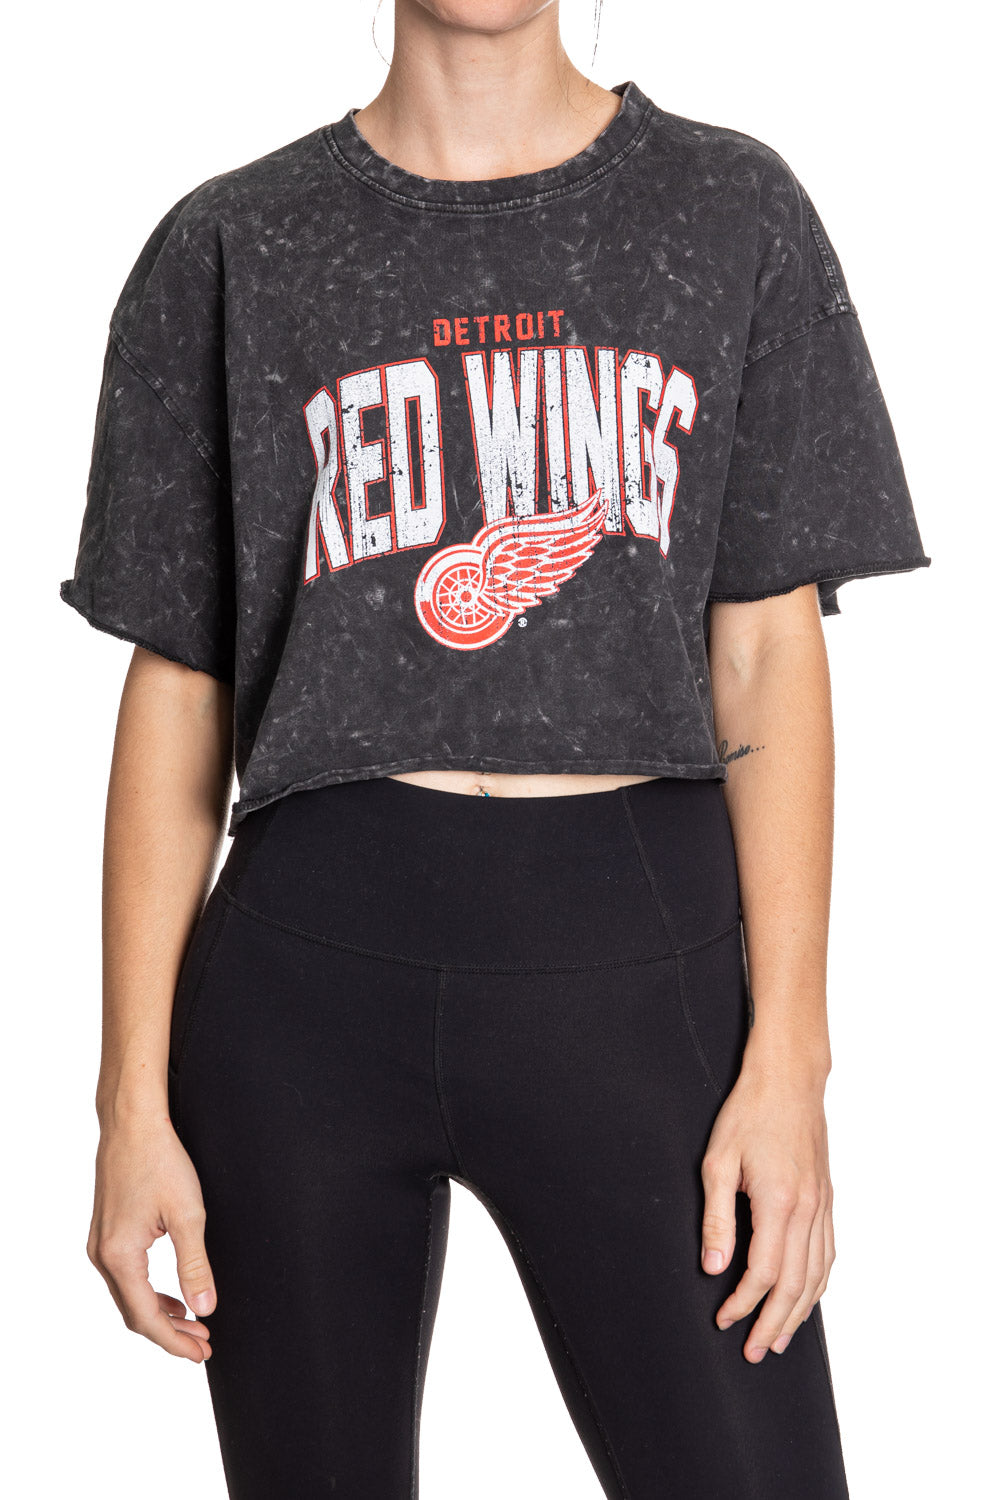 Woman standing in front of a white background wearing an oversized, black, acid wash crop top - featuring a Detroit Red Wings logo in the center of the shirt.